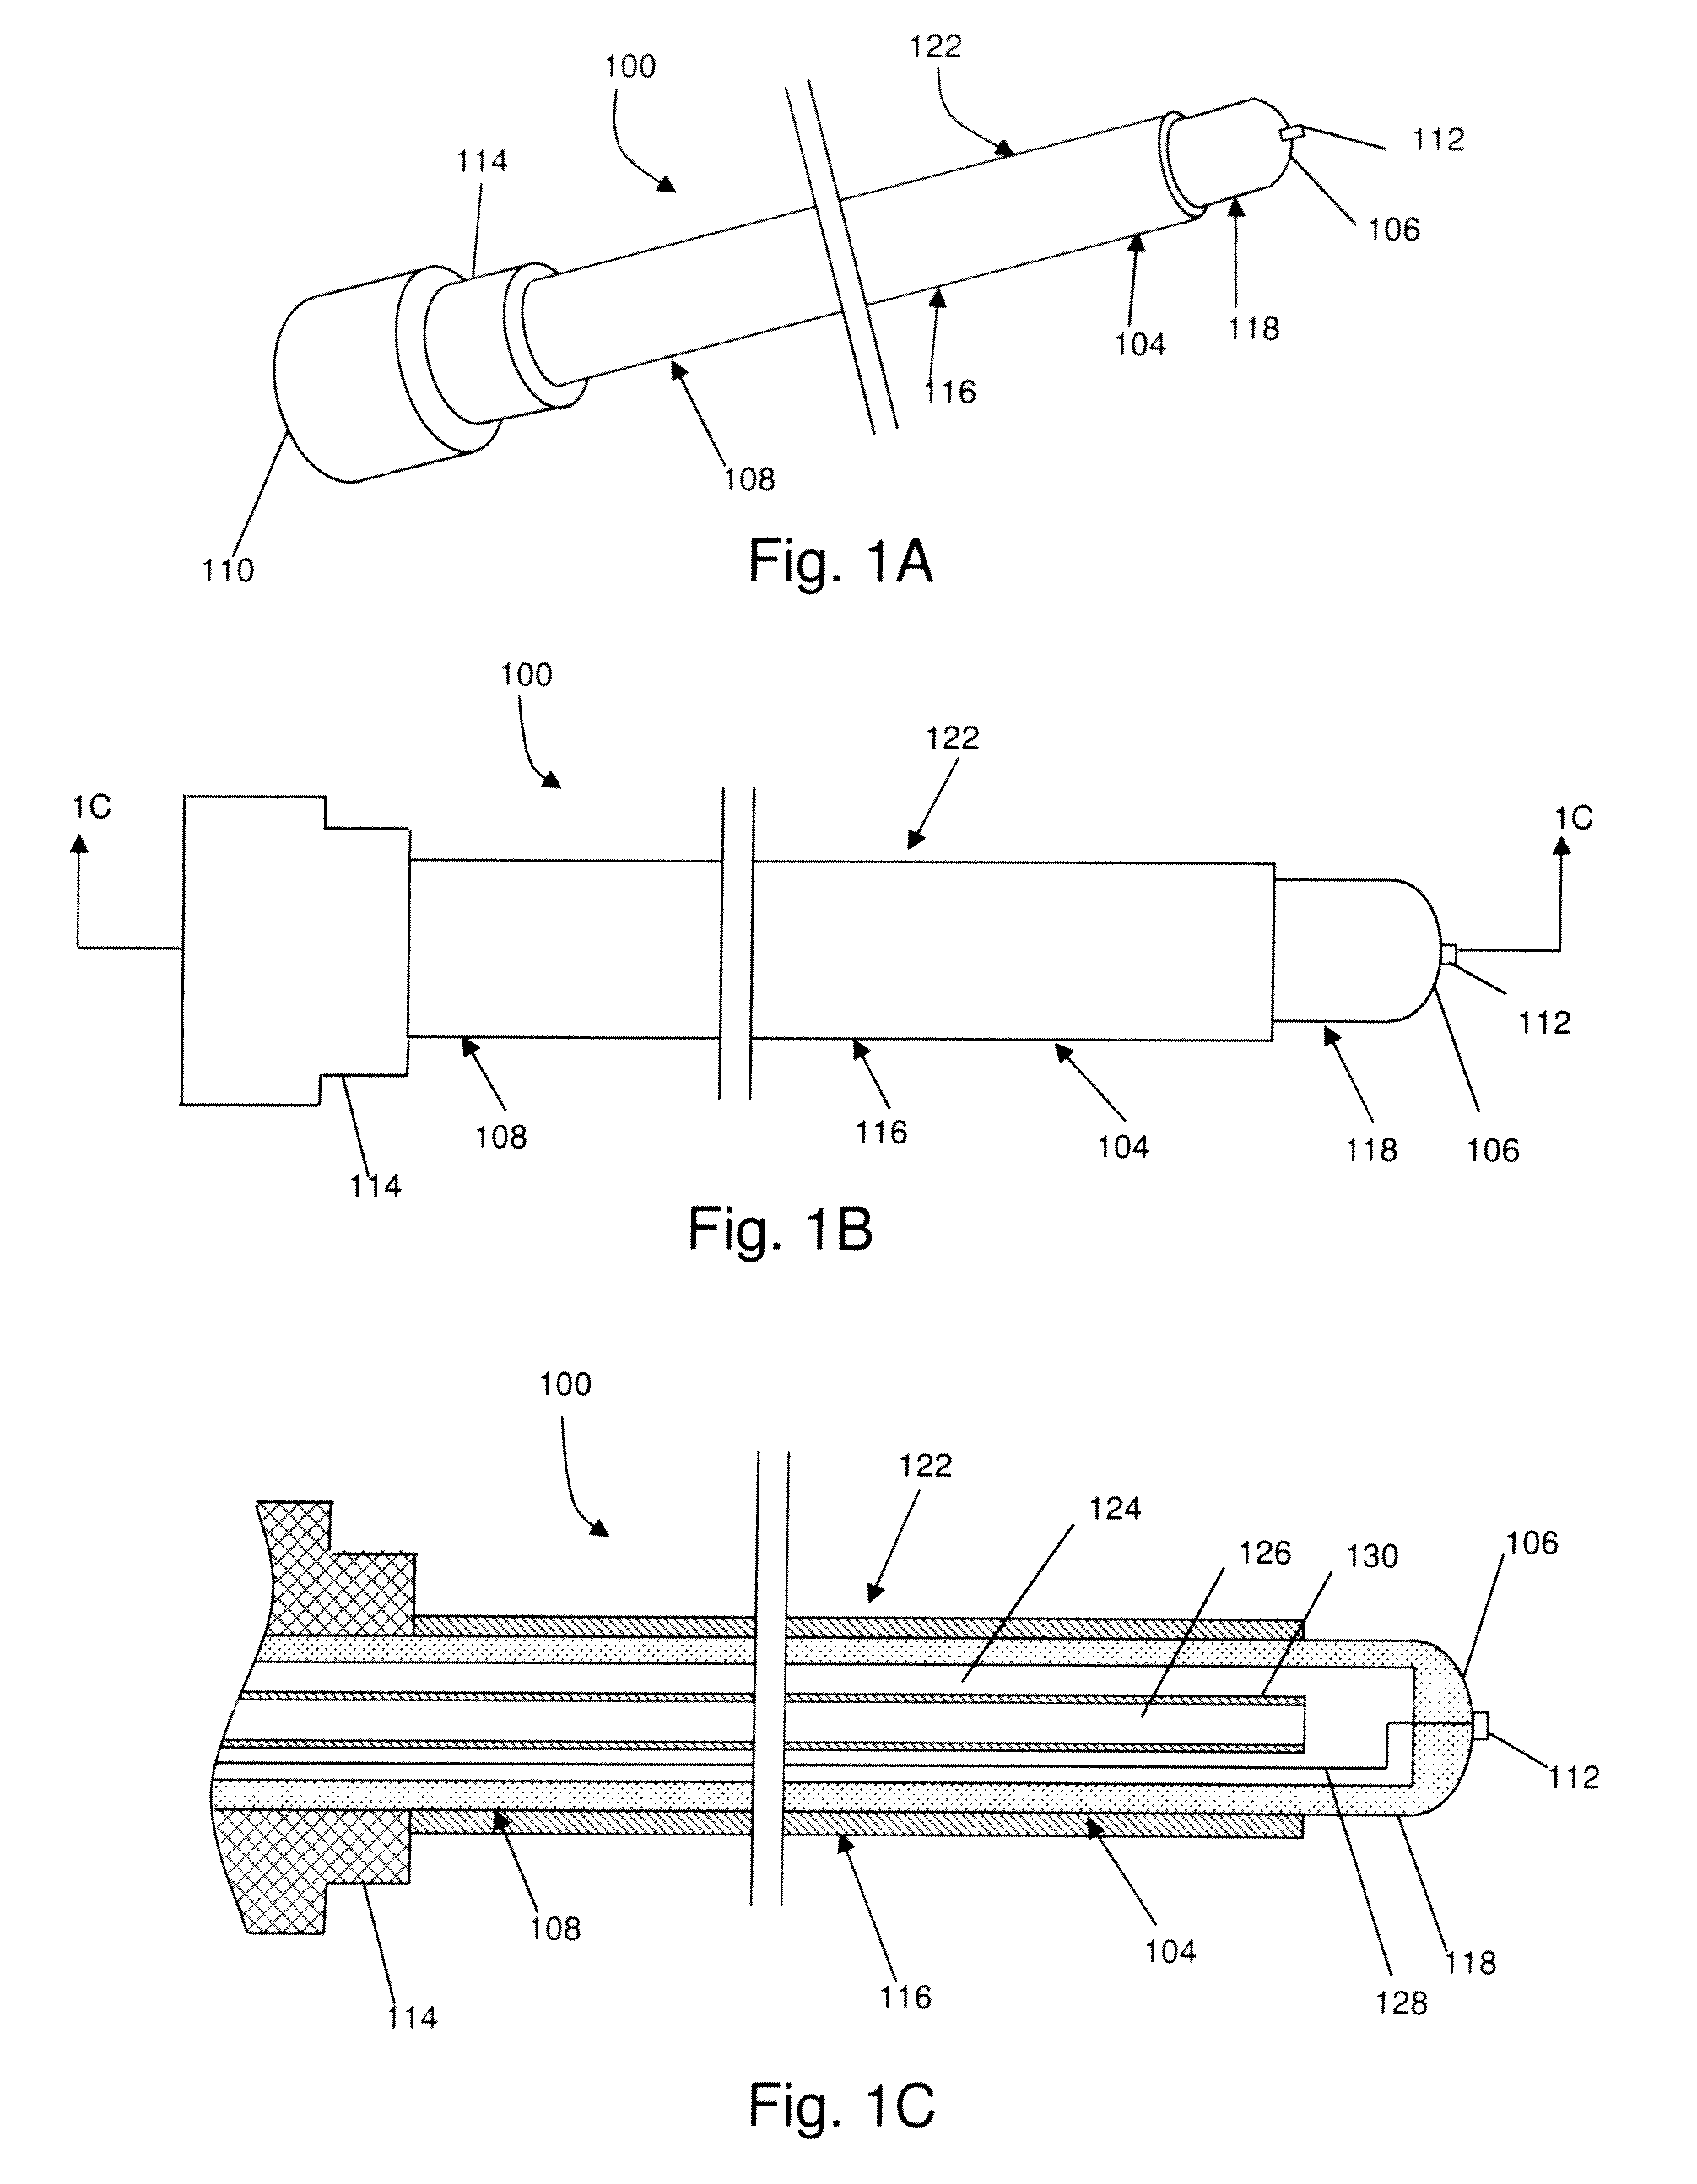 Methods for treating the thoracic region of a patient's body